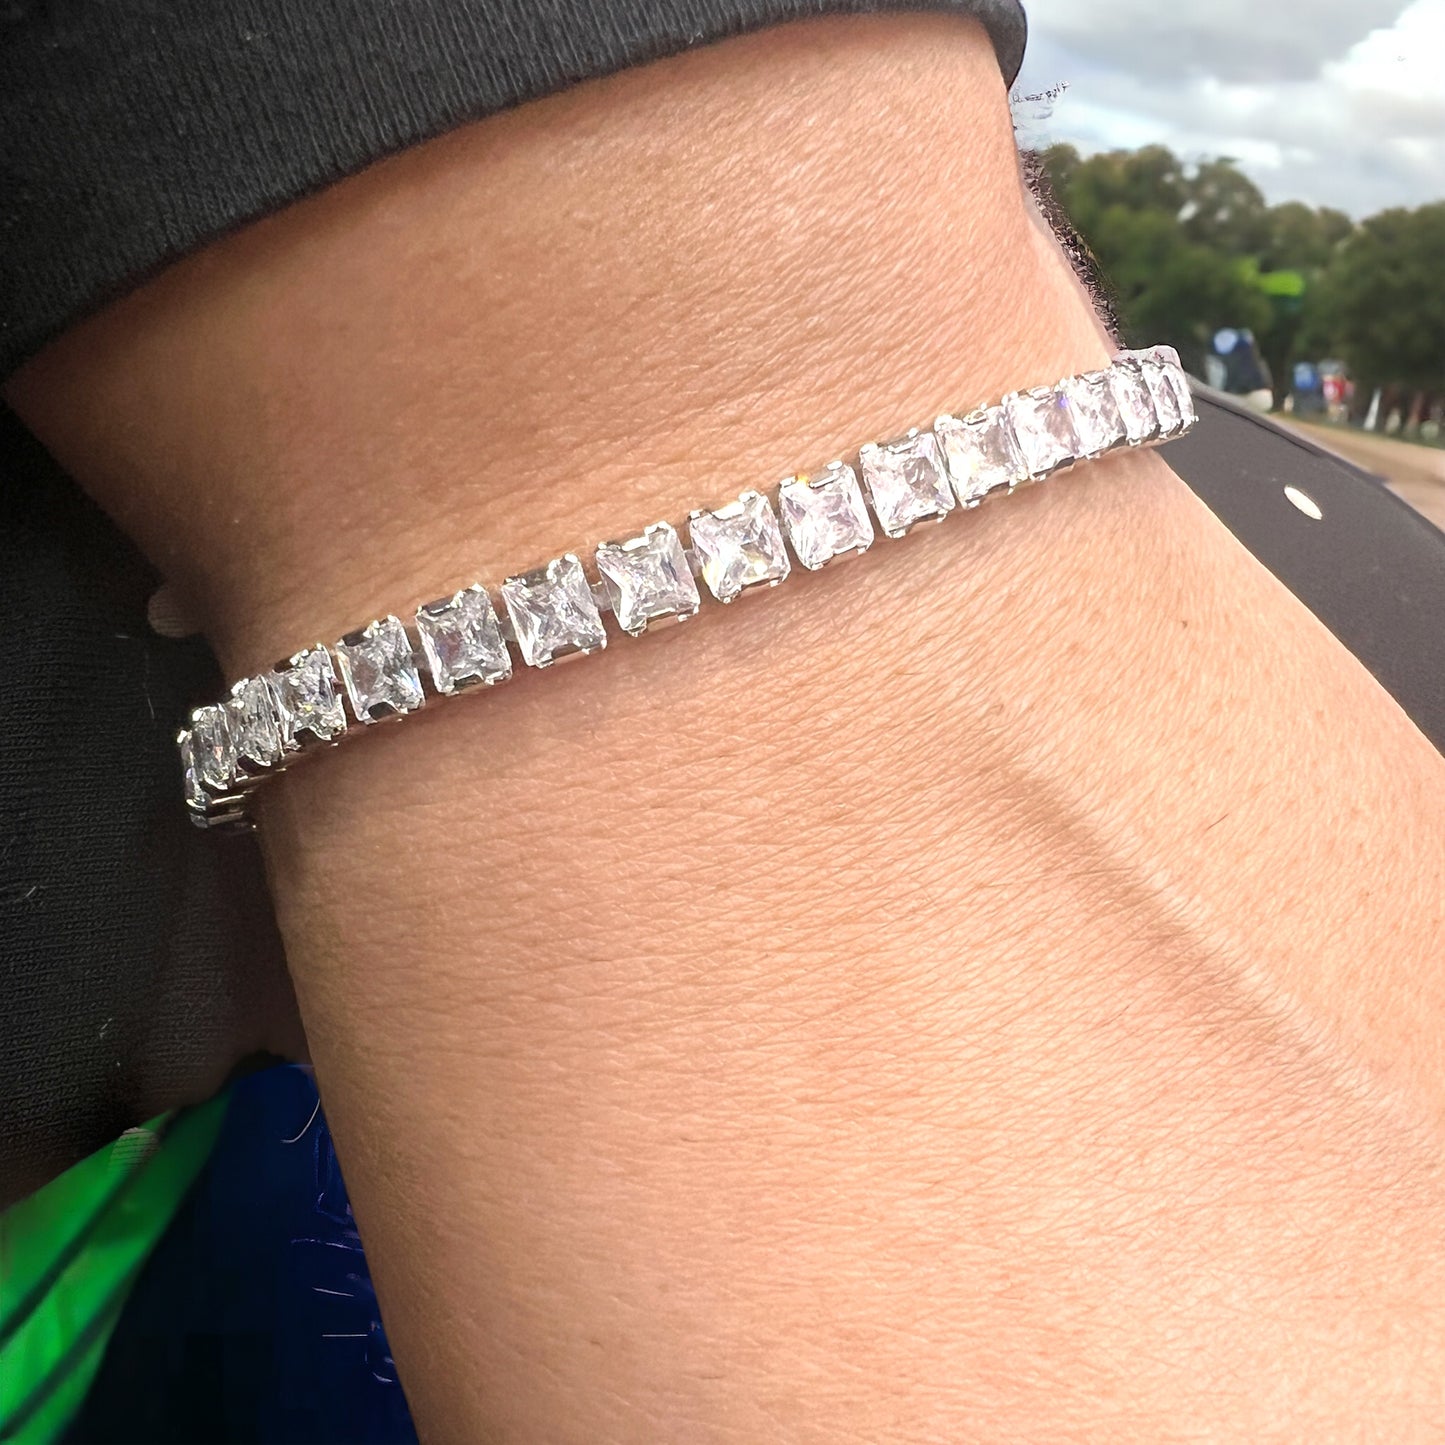 Dazzling Brilliance: Emerald Cut Cubic Zircons Silver Tennis Bracelet, White Gold Plated for Timeless Elegance